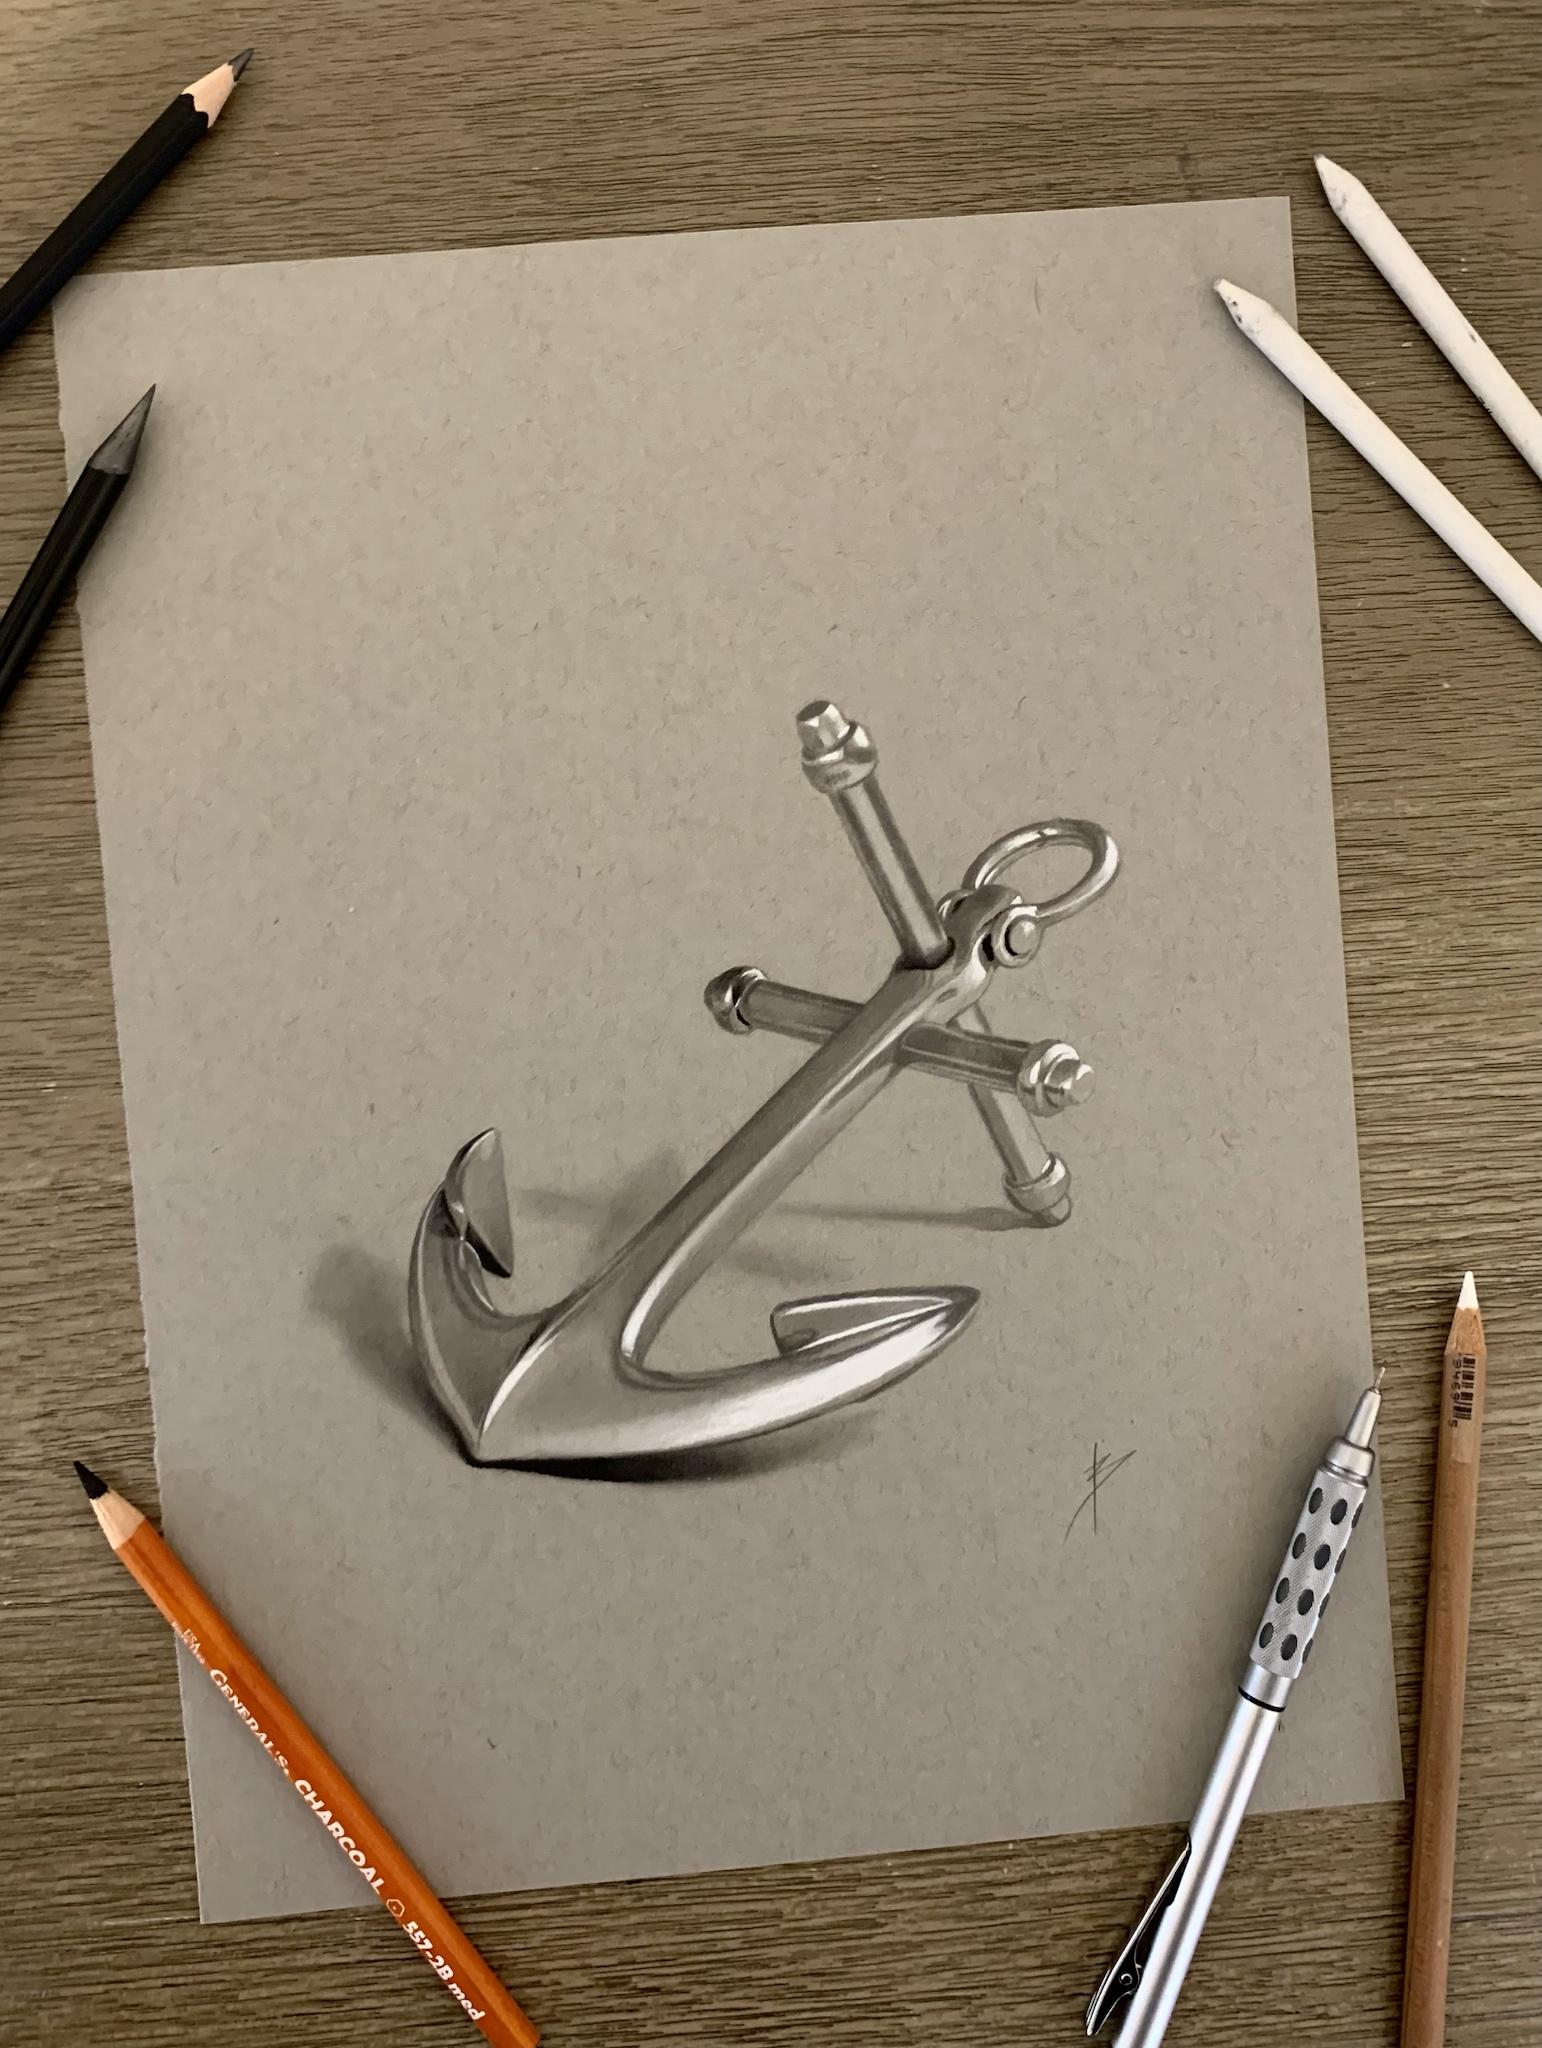 My drawing of an anchor